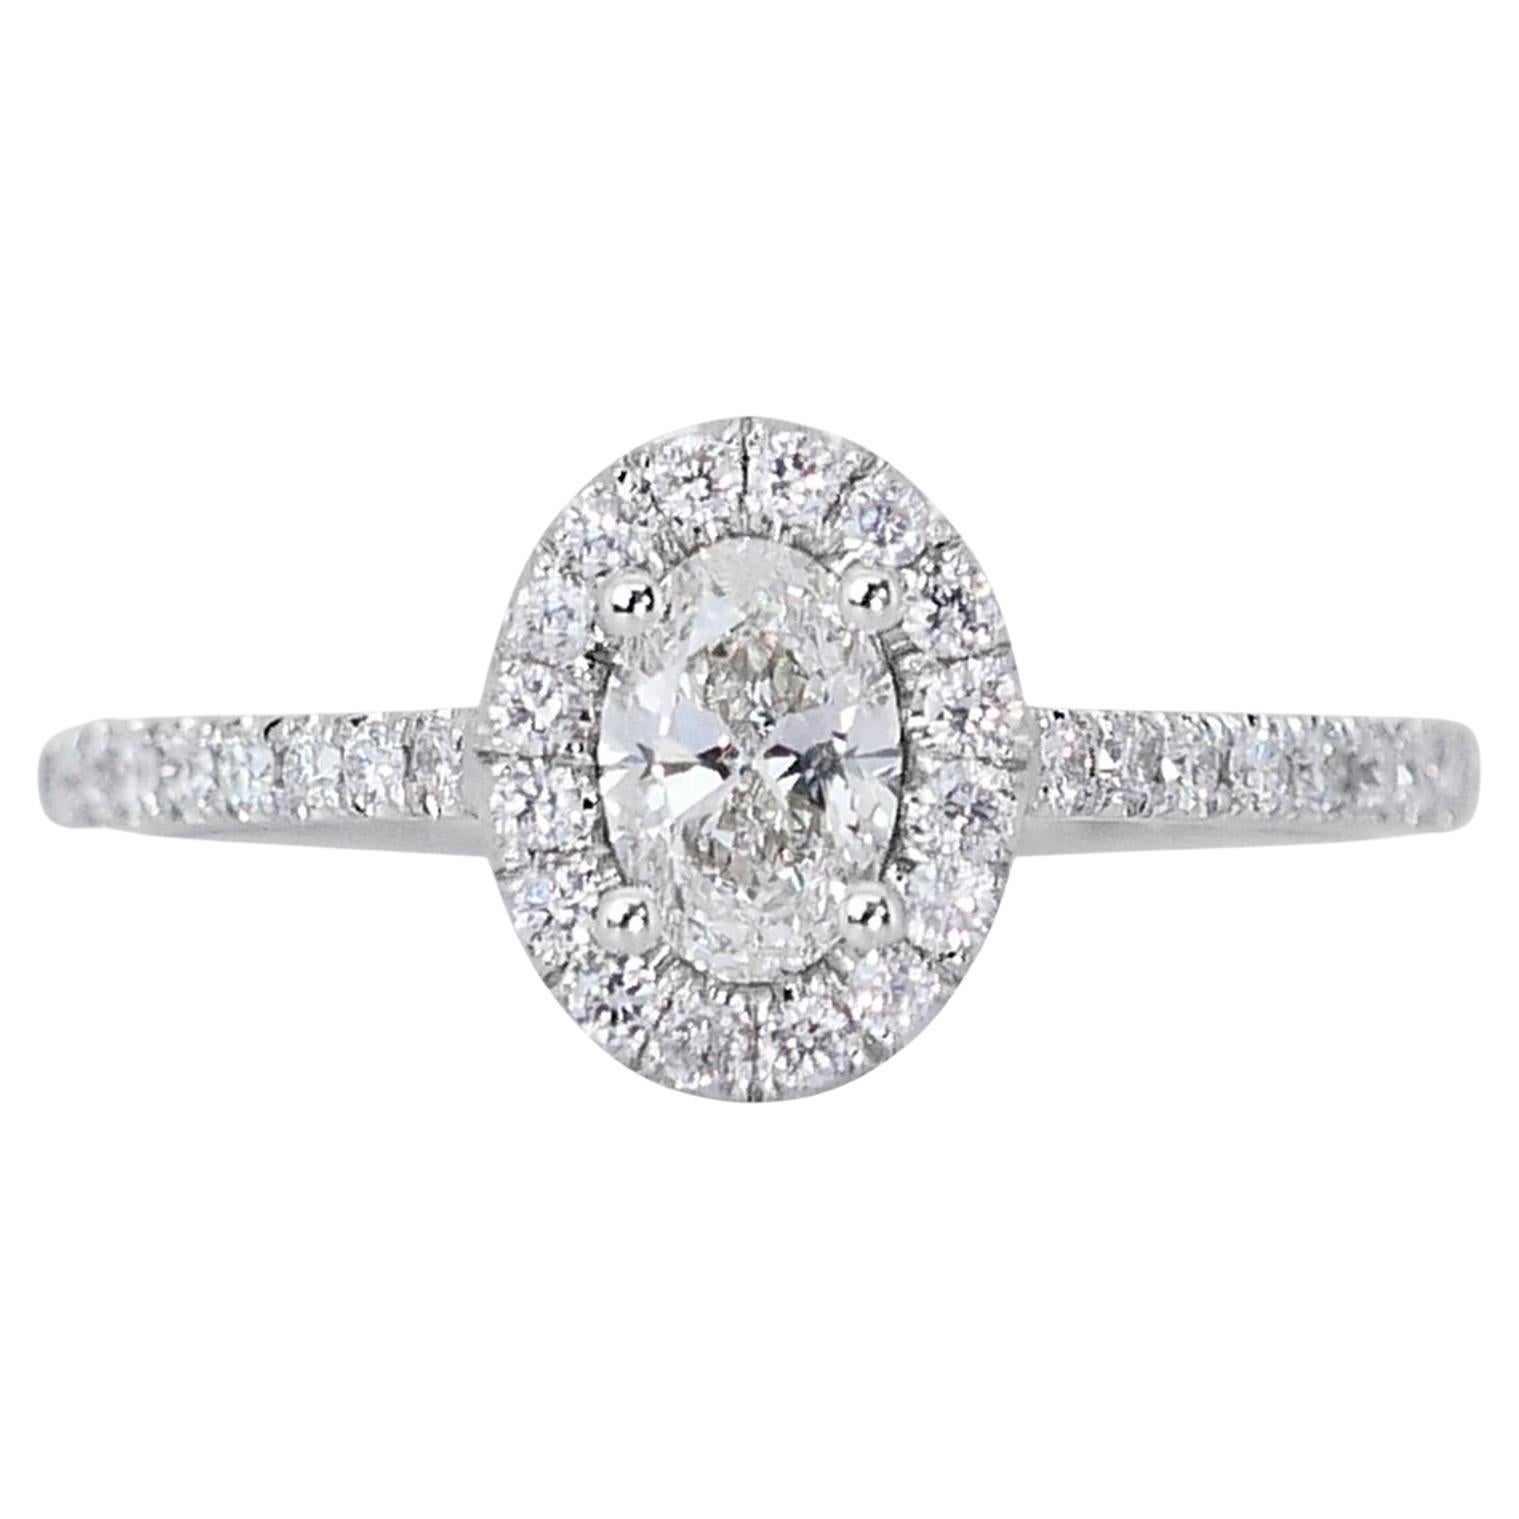 Captivating 1.01 ct Oval Diamond Halo Ring in 18k White Gold – GIA Certified